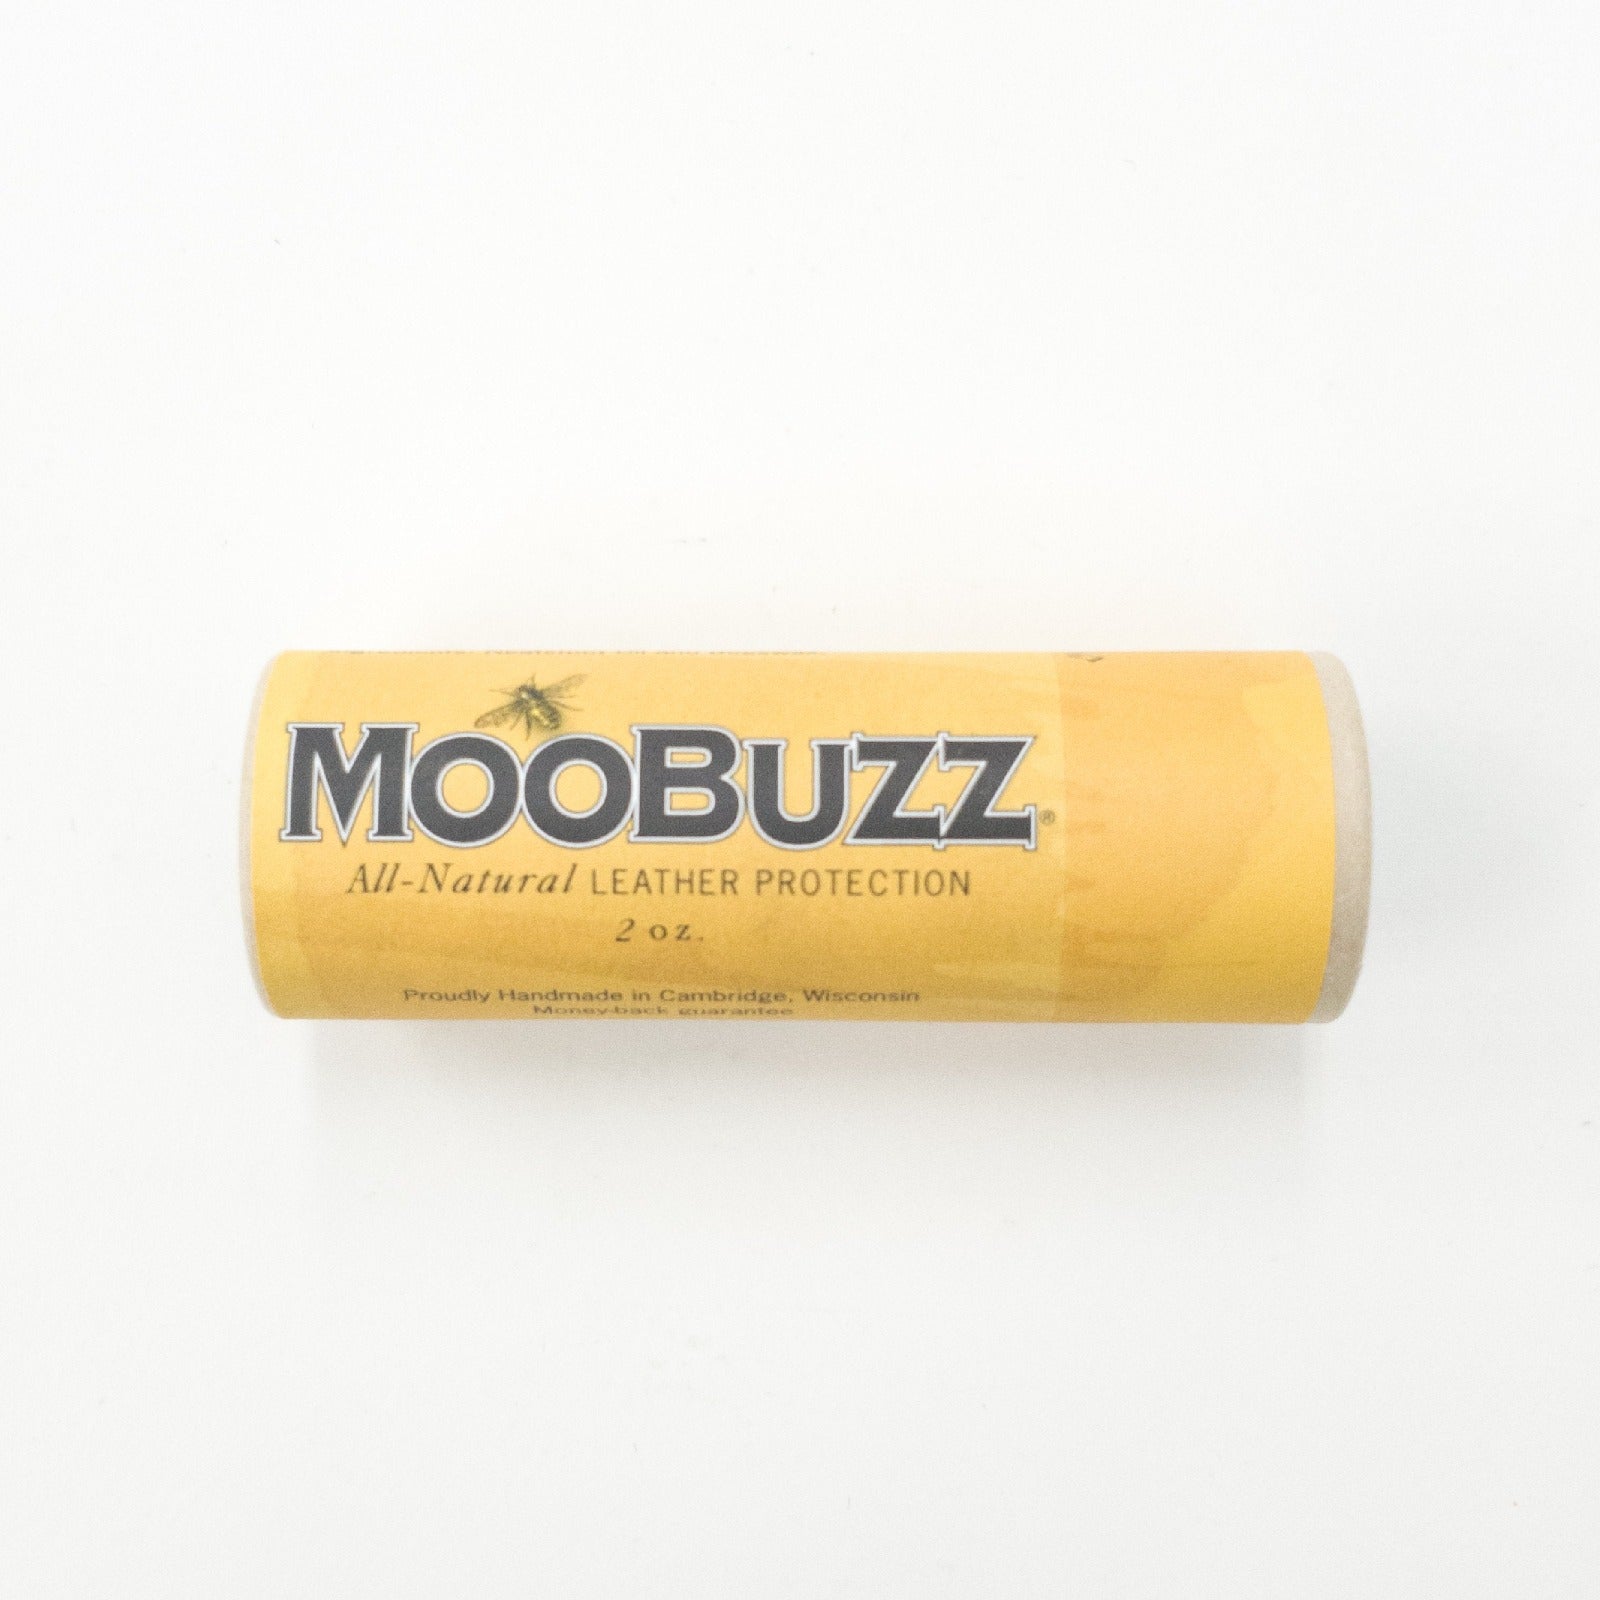 MooBuzz All-Natural Leather Protection, Swifty Stick - 2 OZ | The Leather Guy